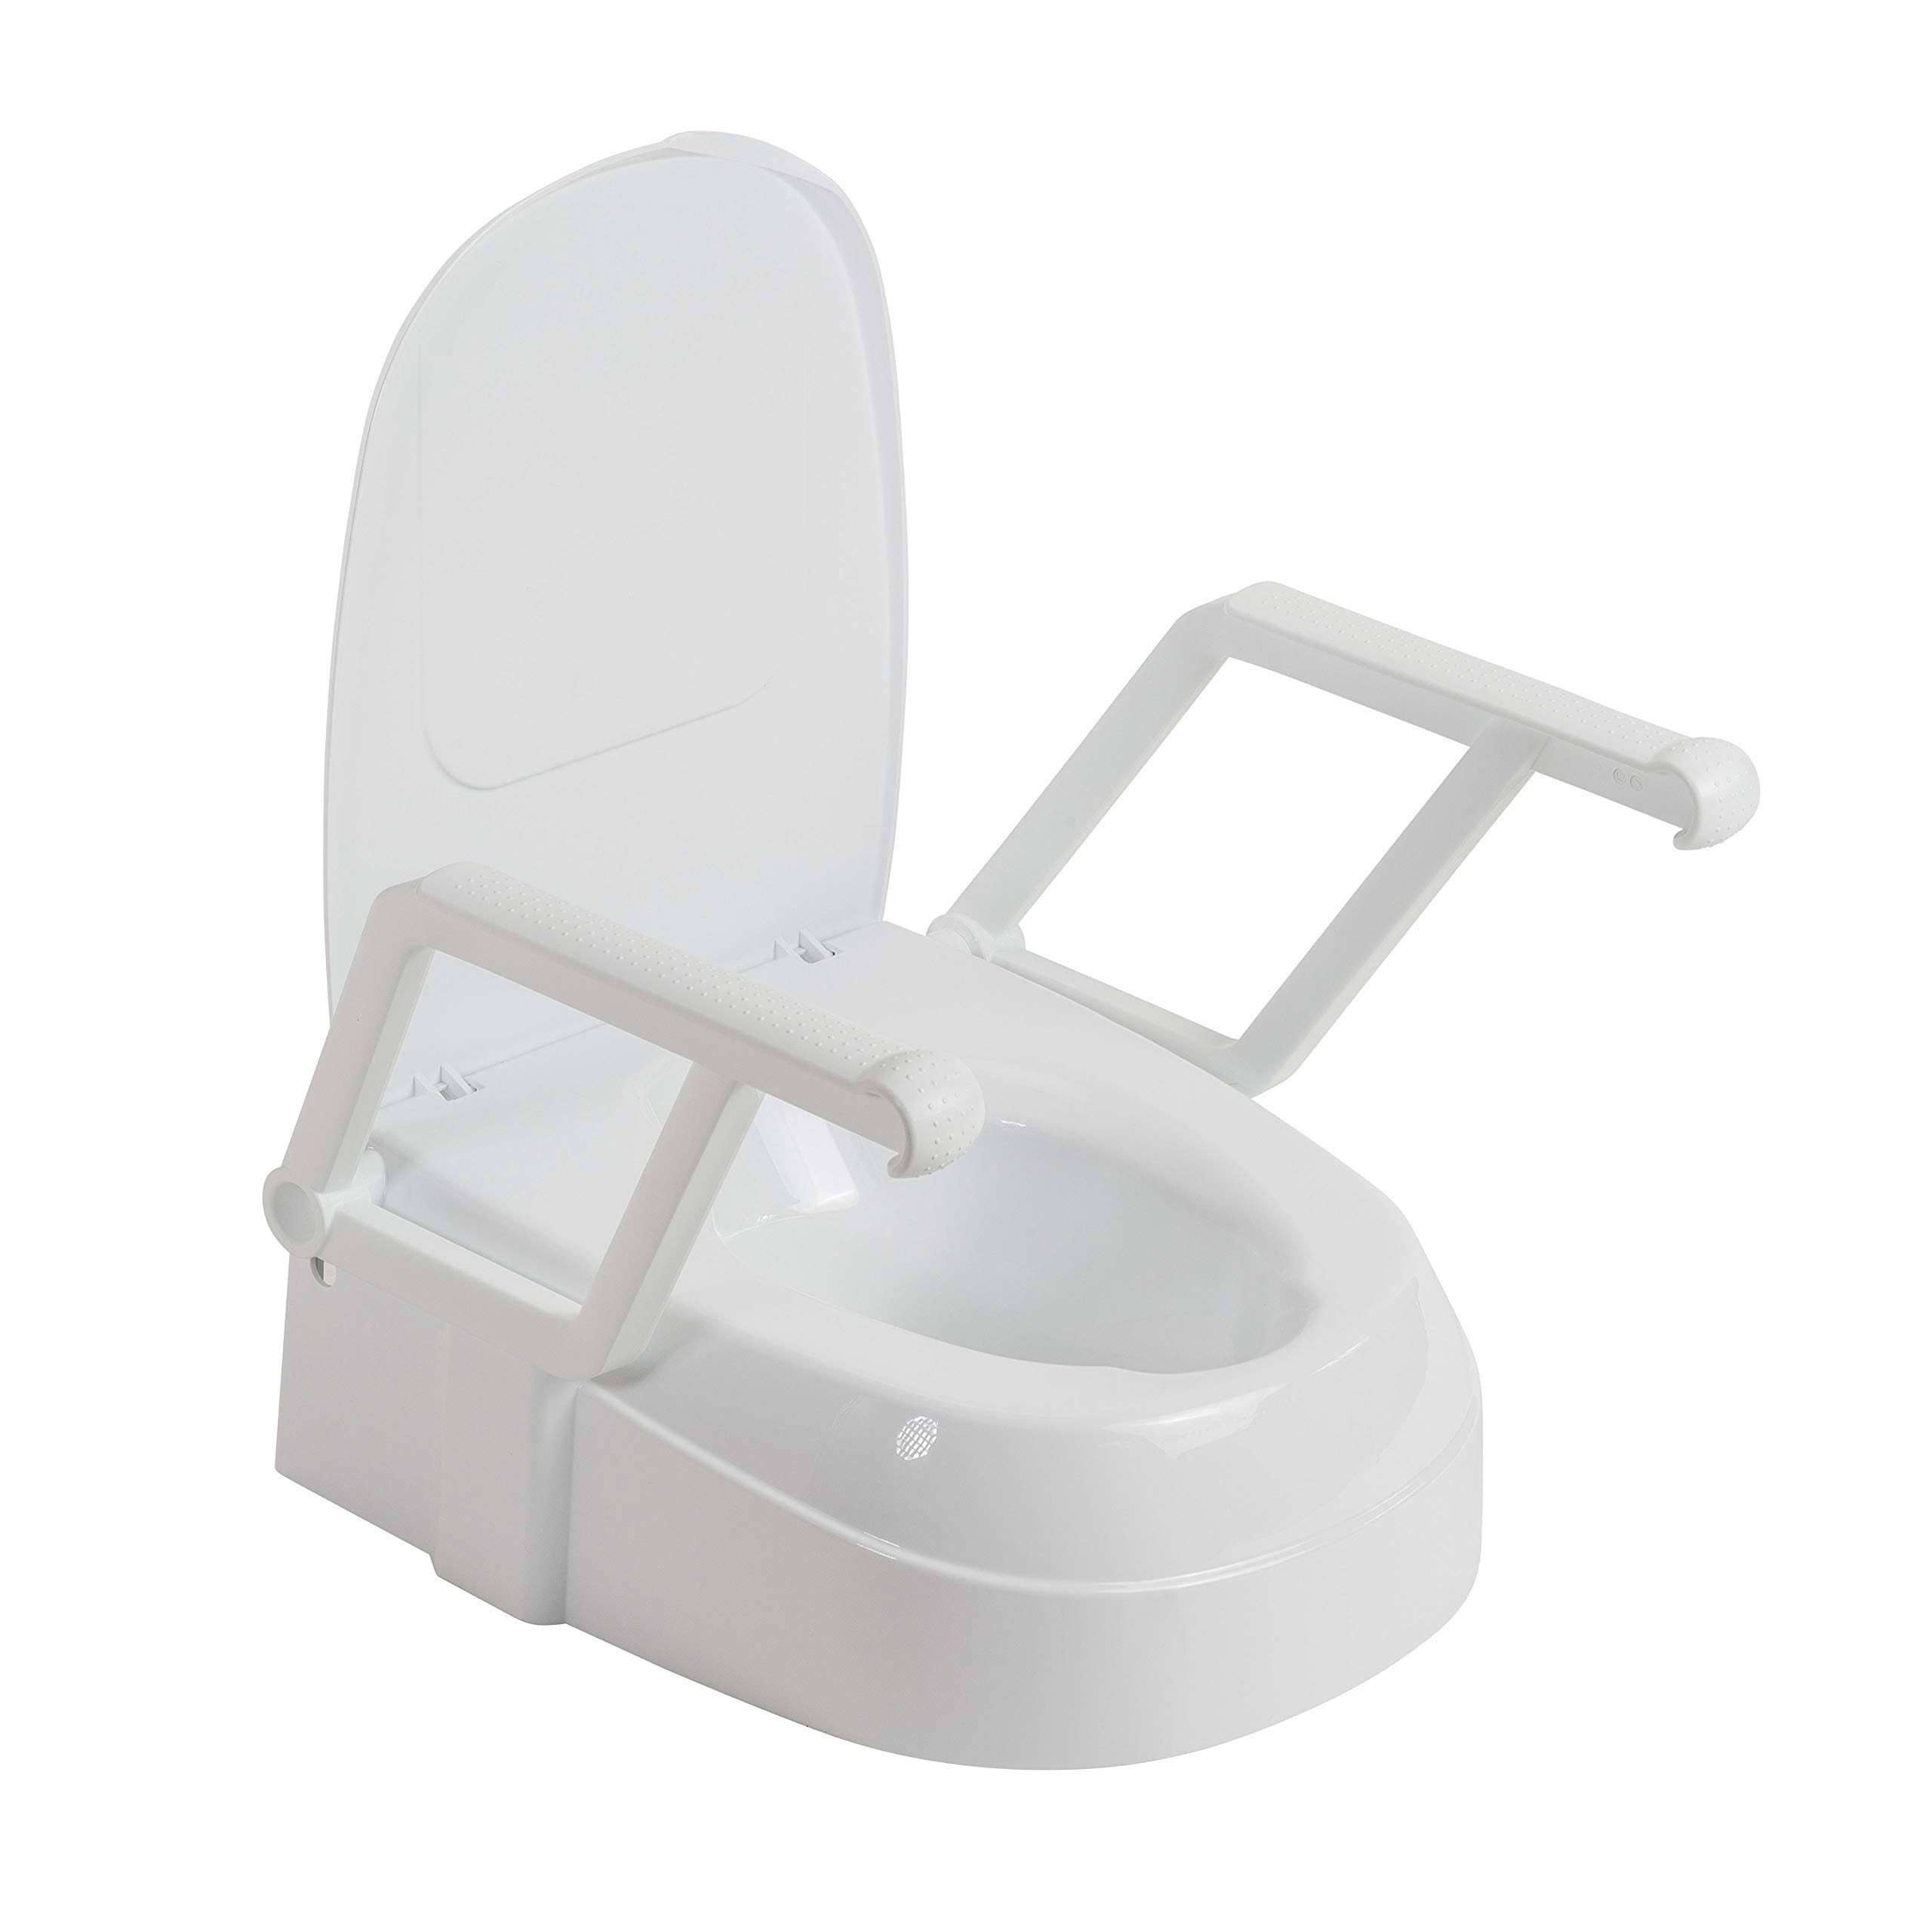 Drive Medical PreserveTech Universal Raised Toilet Seat with Pivoting Armrests